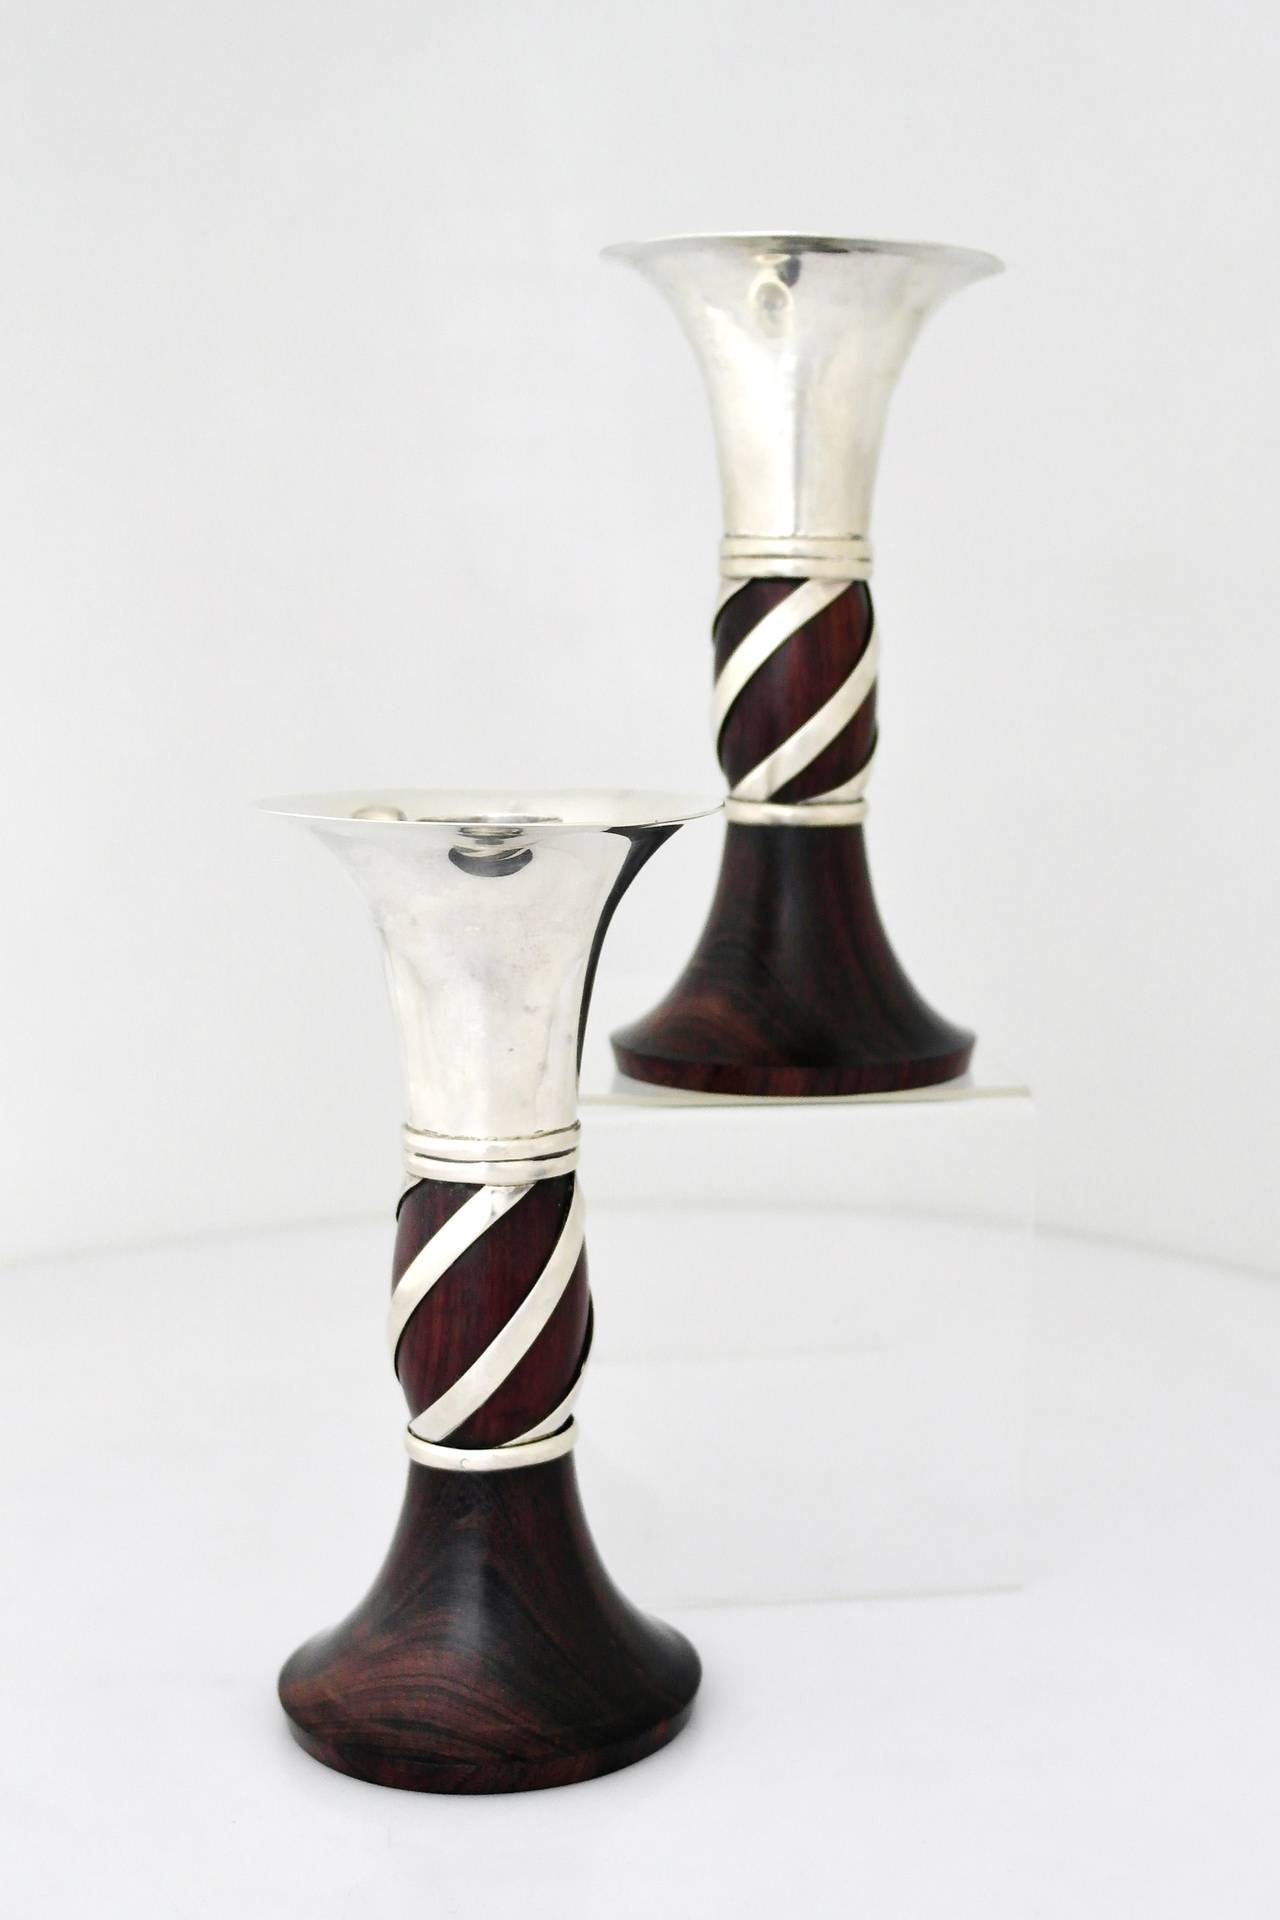 Forged William Spratling Sterling Silver and Rosewood Candlesticks, pair 1950 For Sale